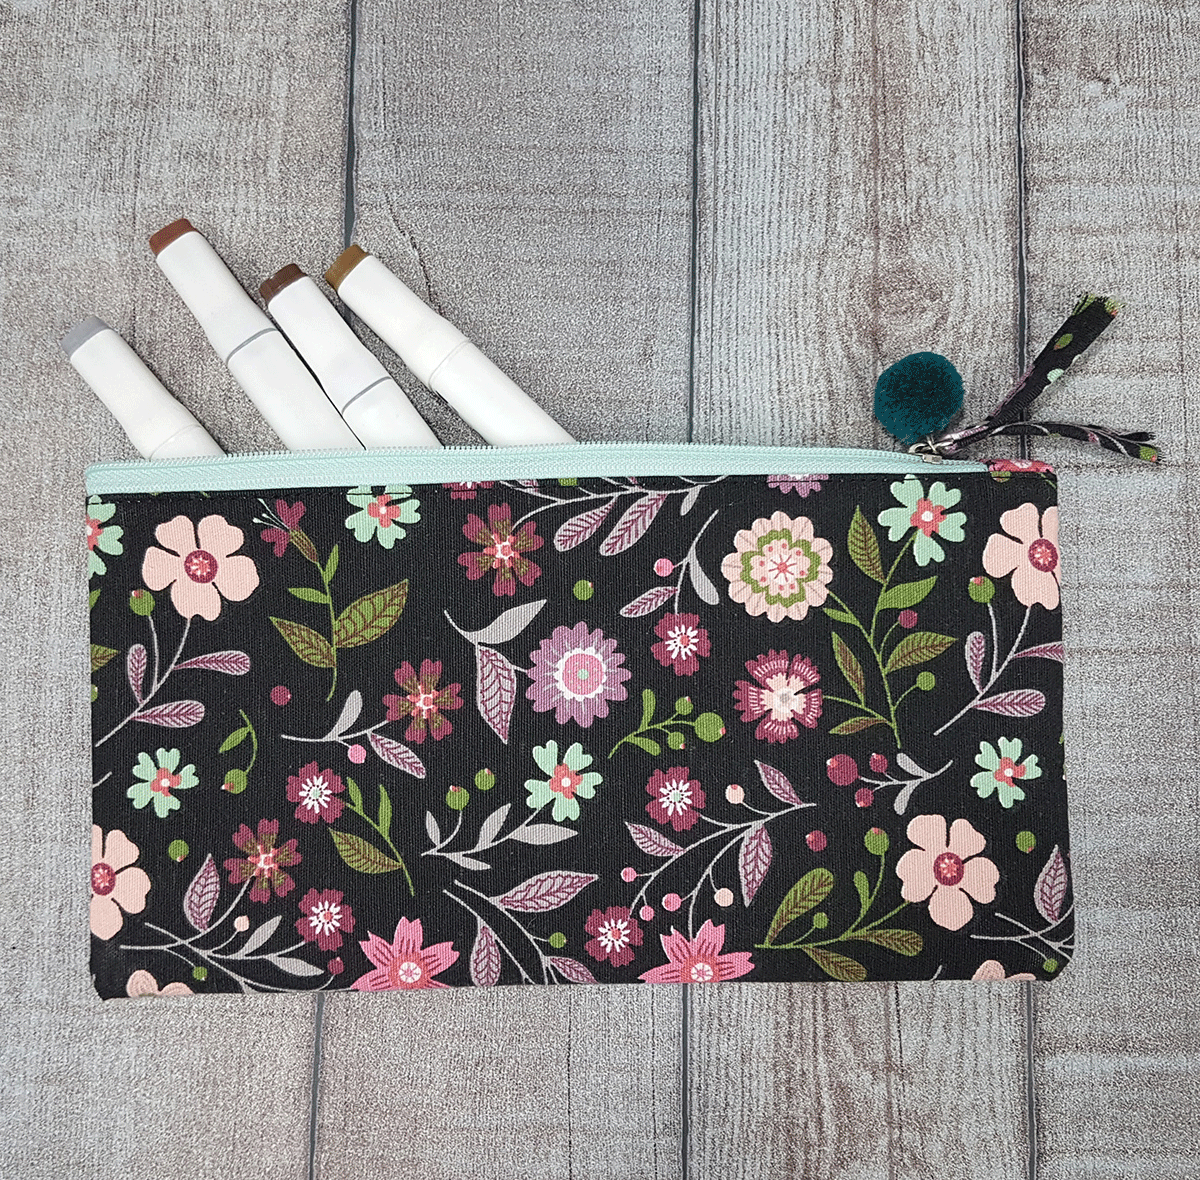 Flower Canvas Cosmetic Bag